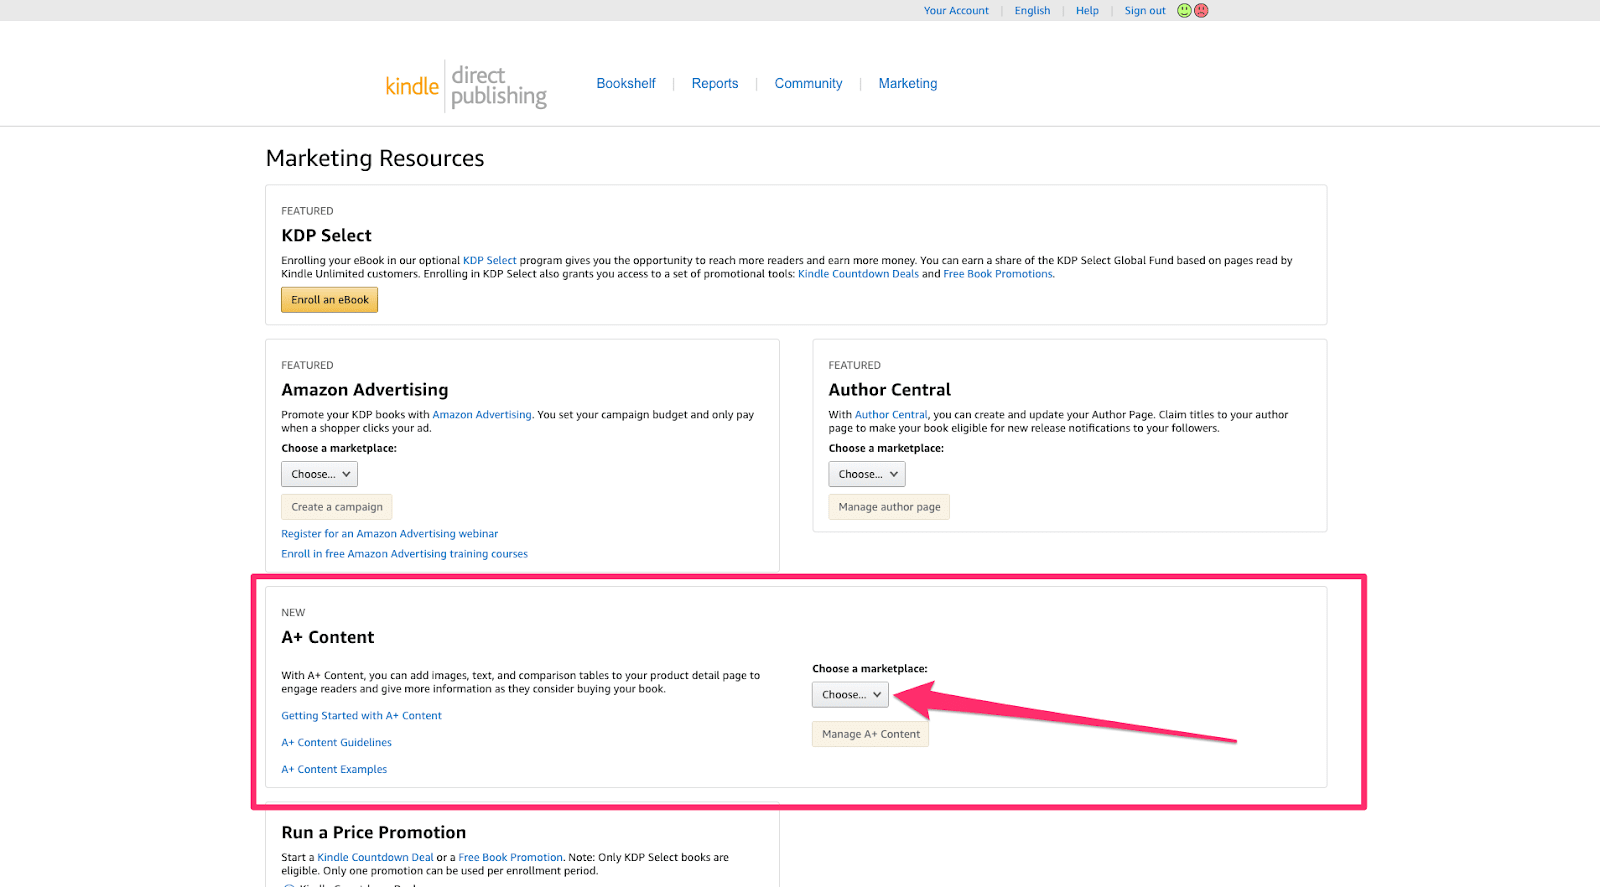 How to create Amazon A+ Content step 1